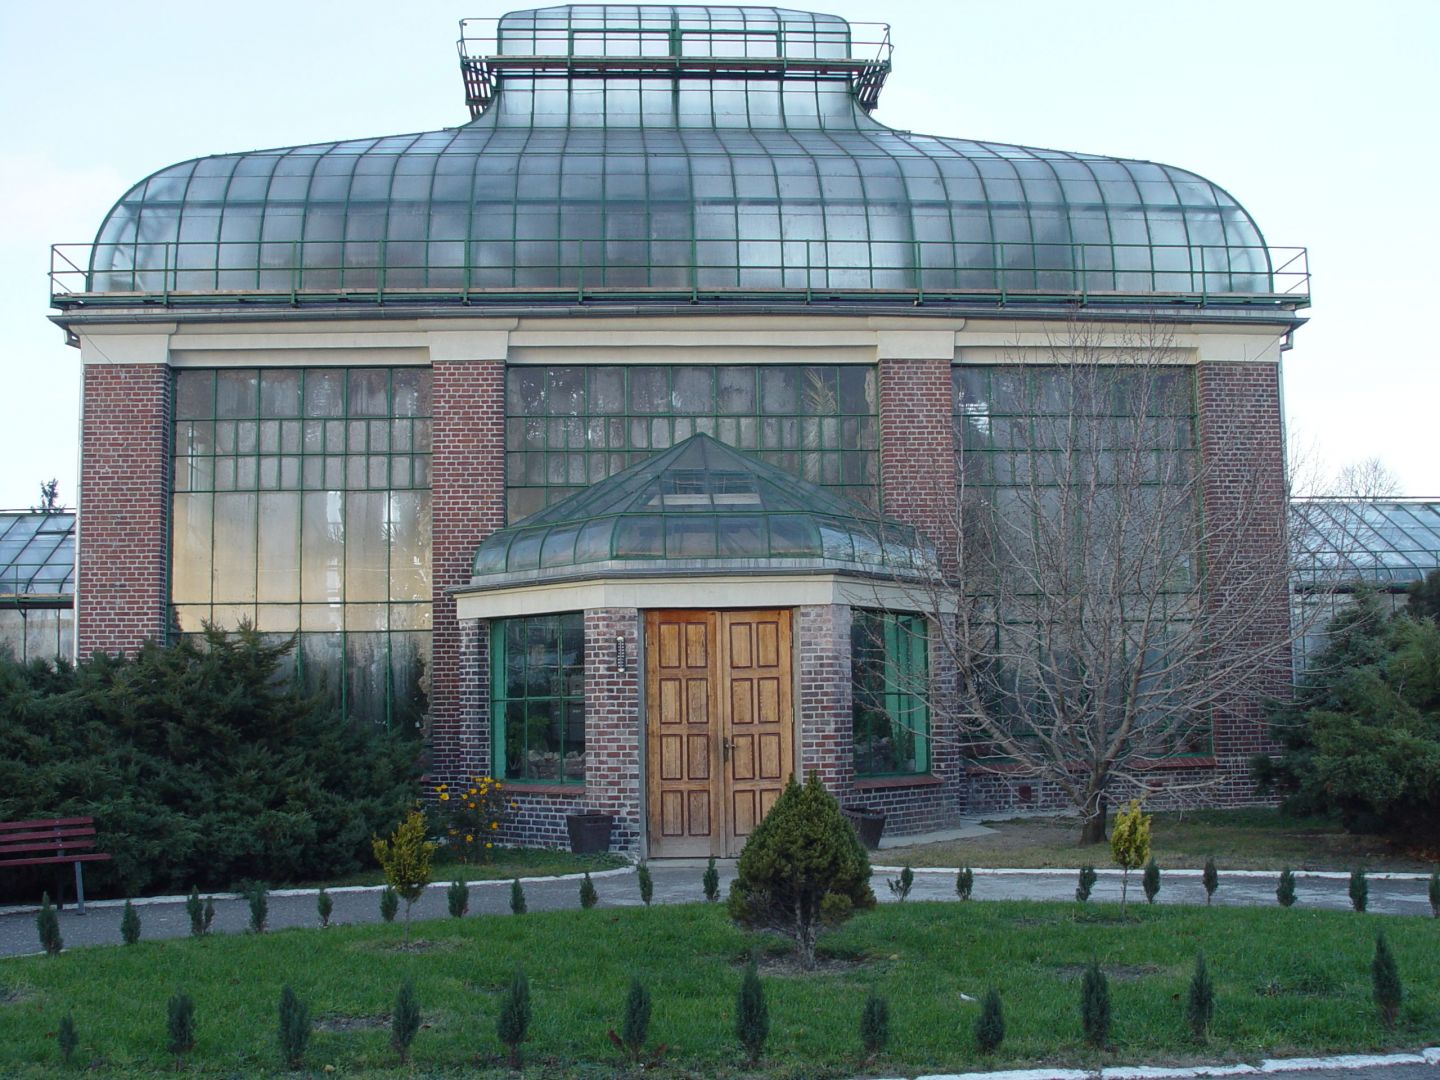 Main building of the palm house